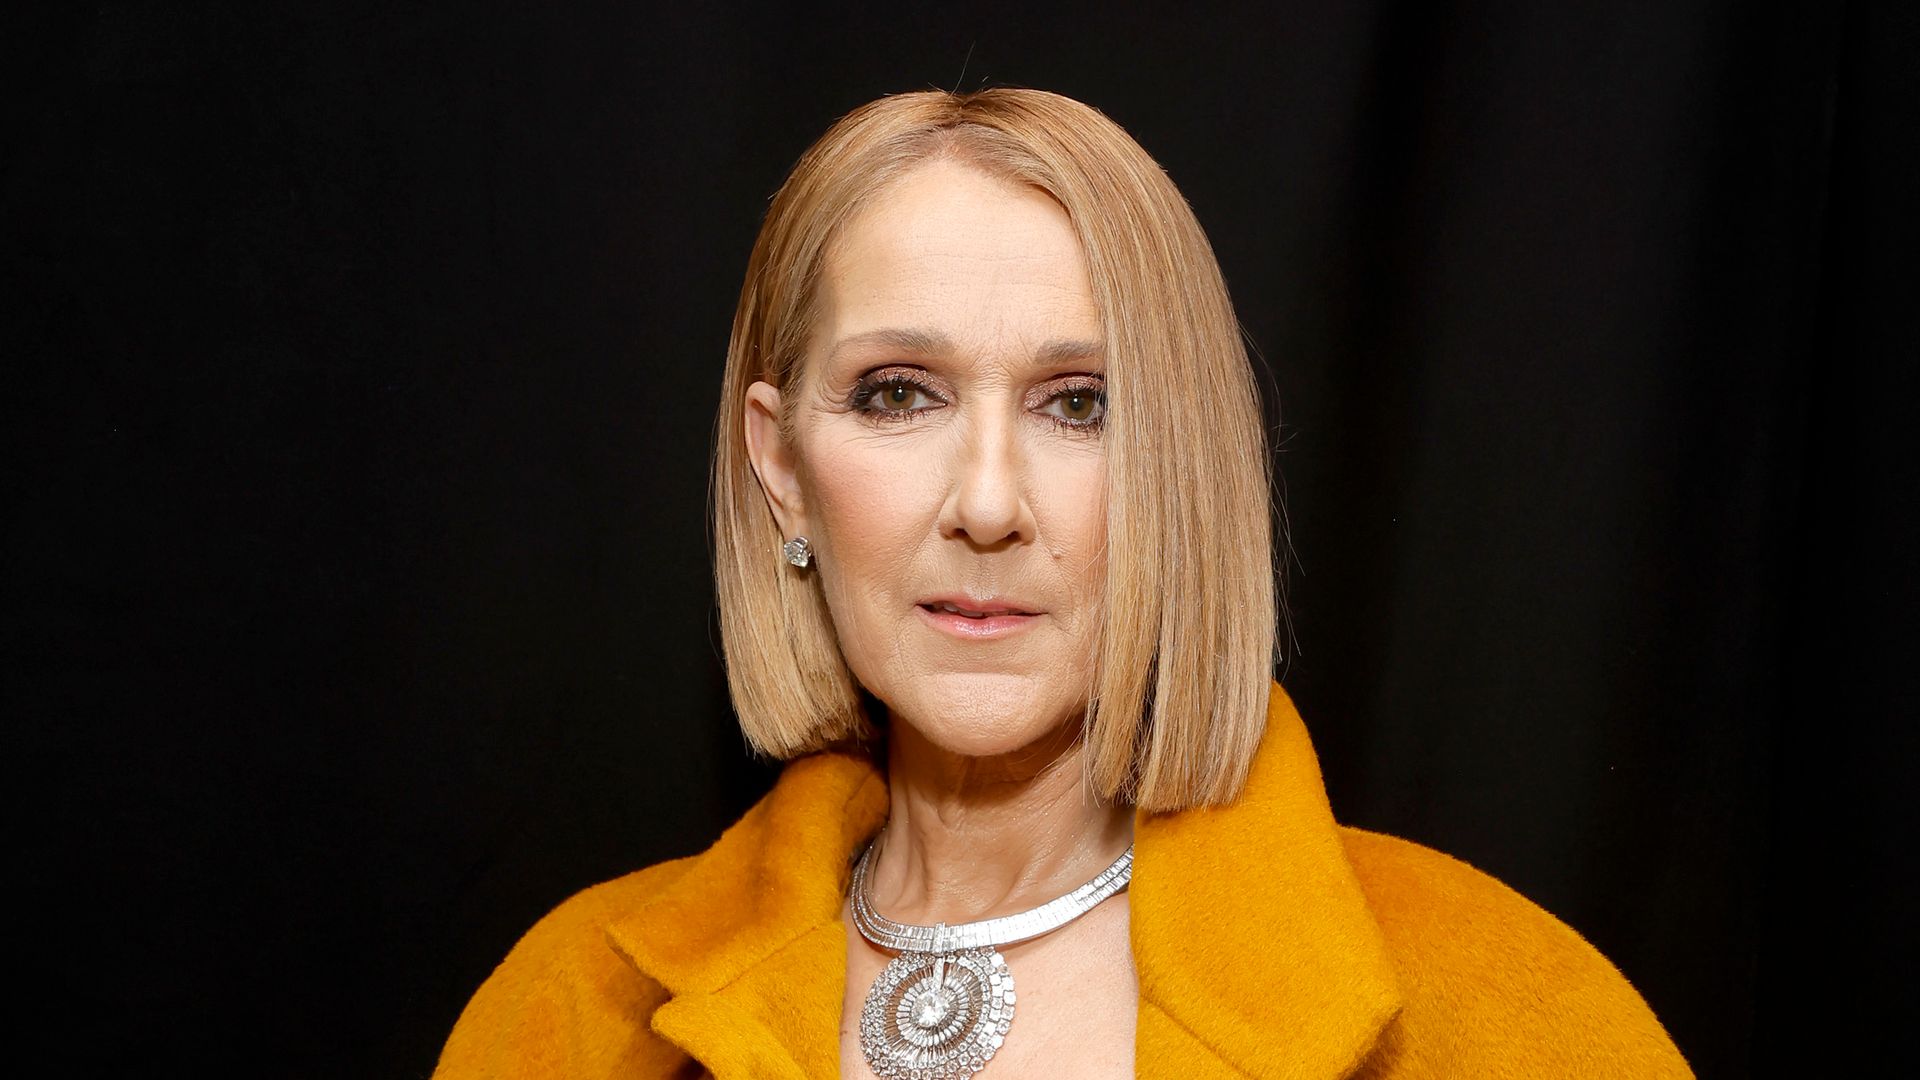 Celine Dion's new photo from family home sparks fan response ahead of major comeback